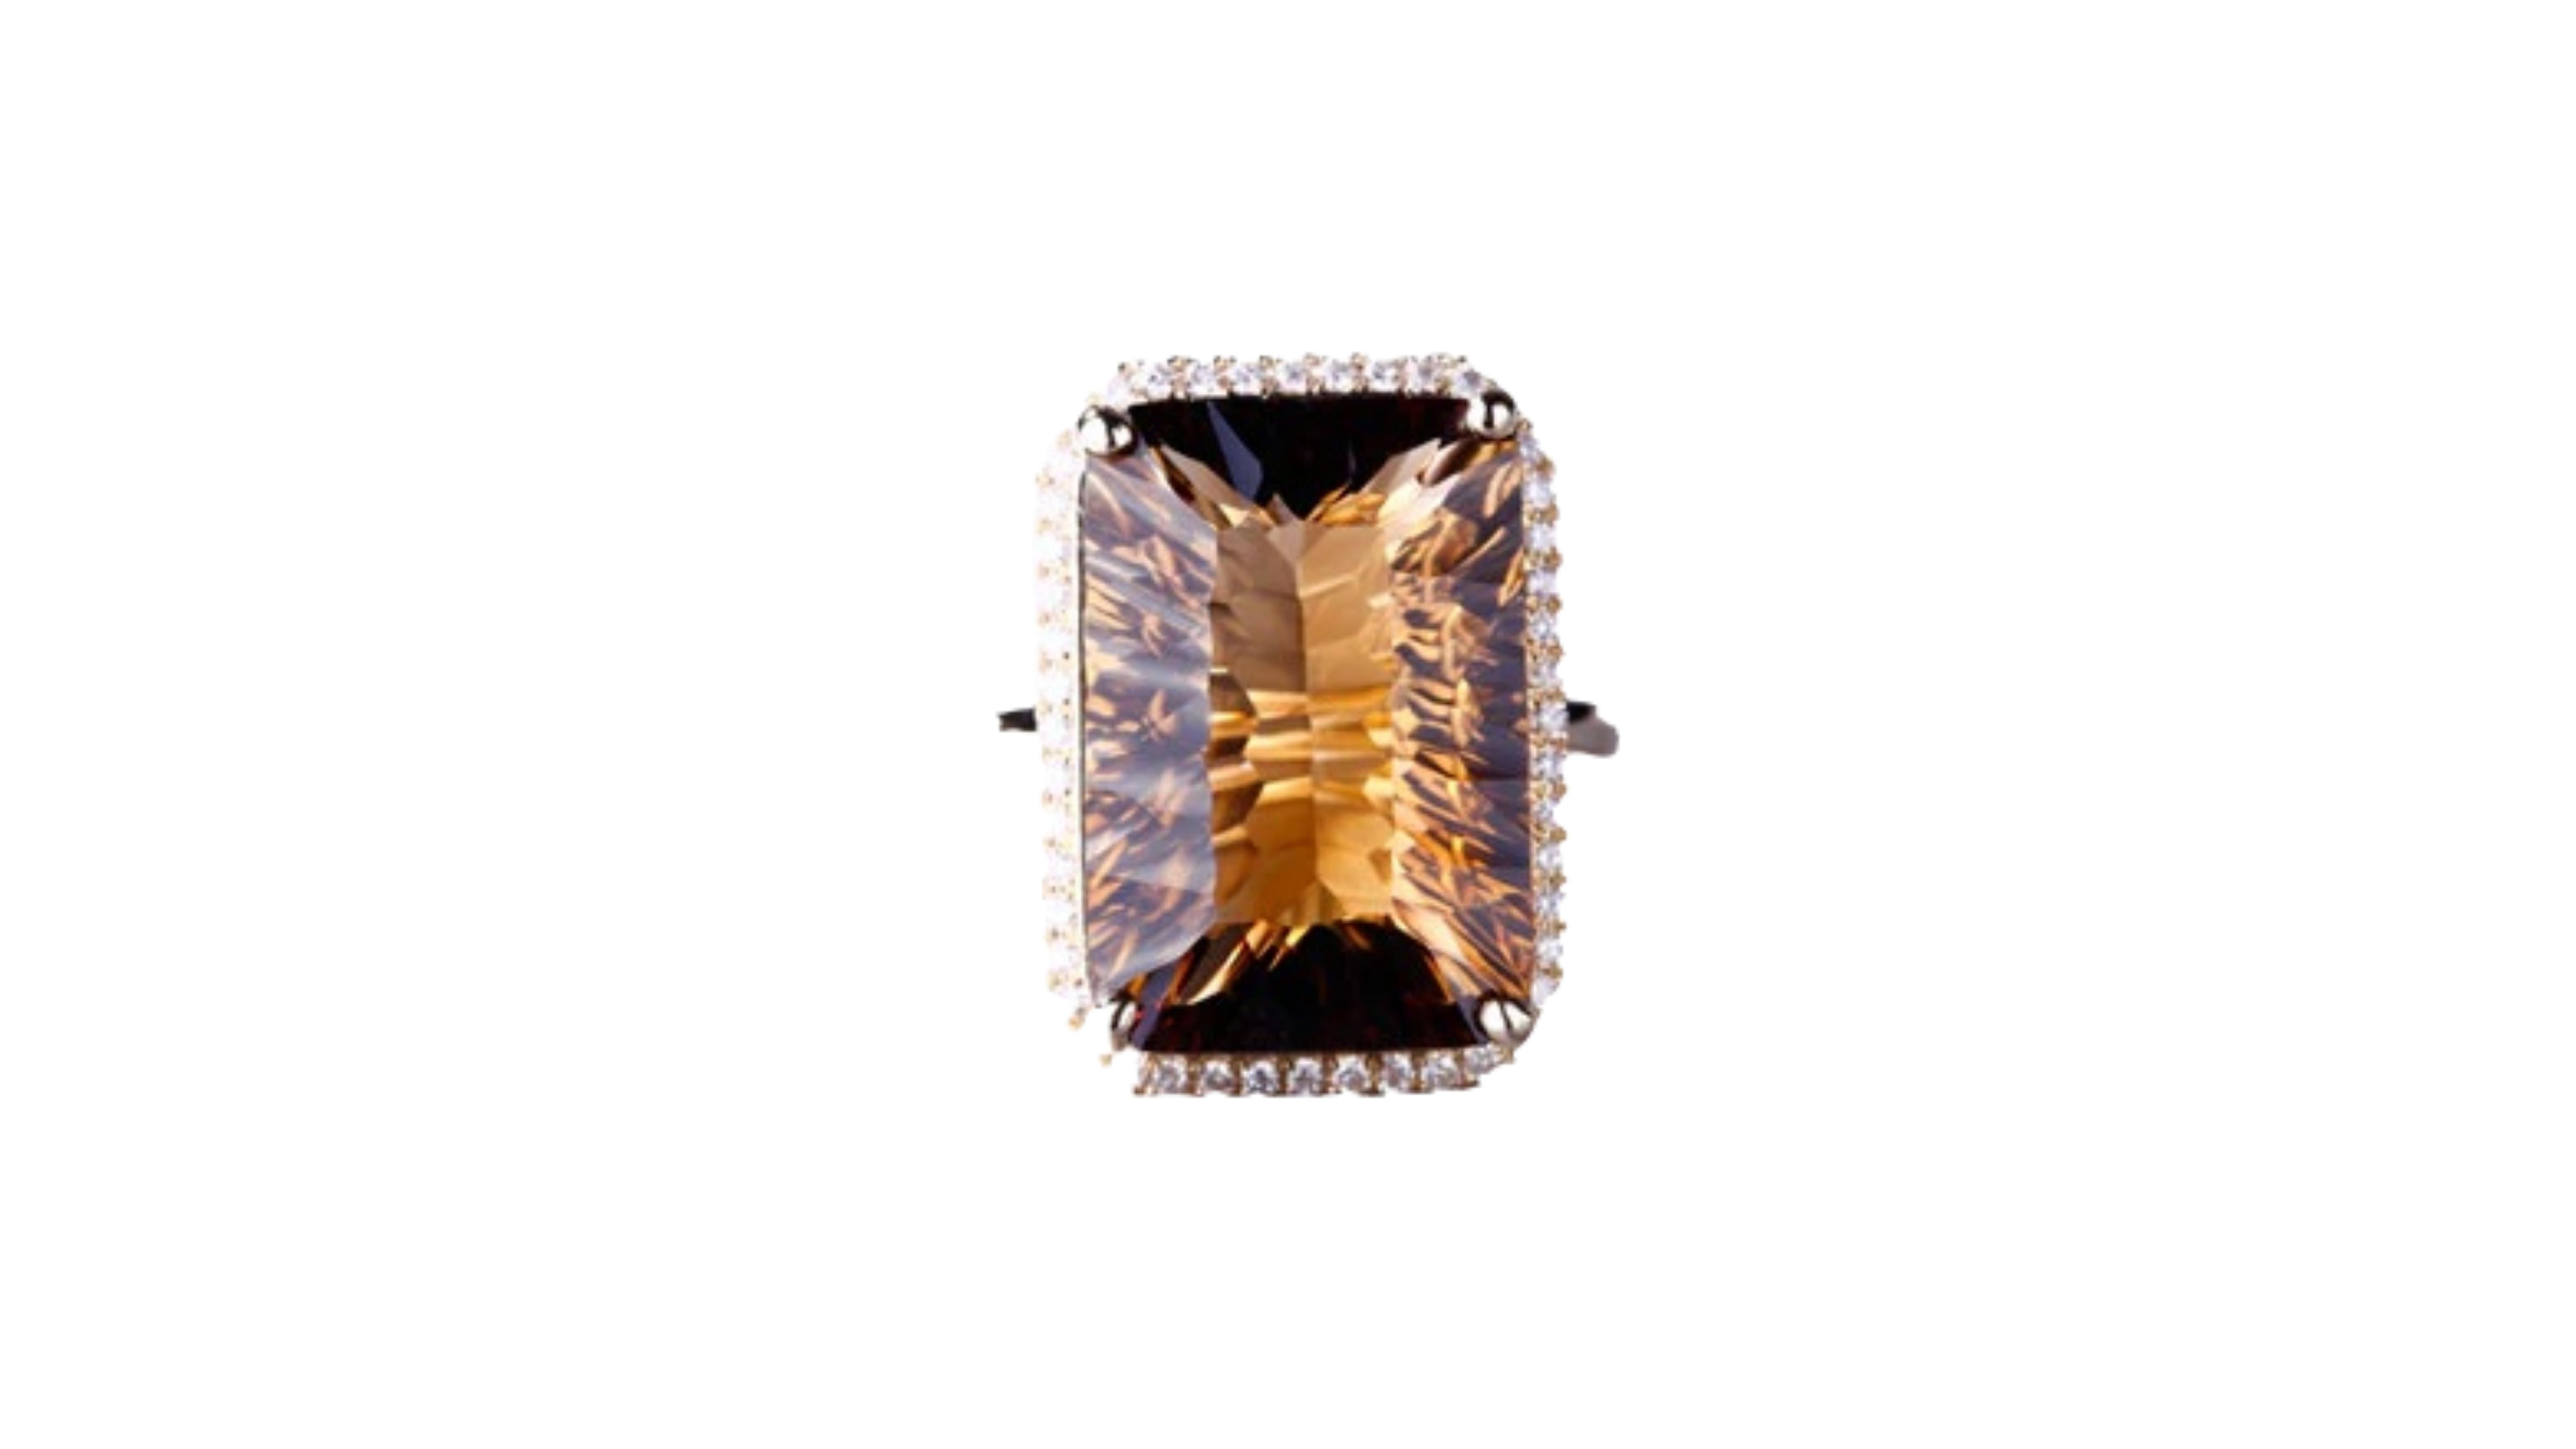 

17.8 Carat Smoky Quartz Diamond ring stands out with the  44 diamonds around the centre stone.

The color of smoky quartz is produced when natural radiation, emitted from the surrounding rock, activates color centres around aluminum impurities